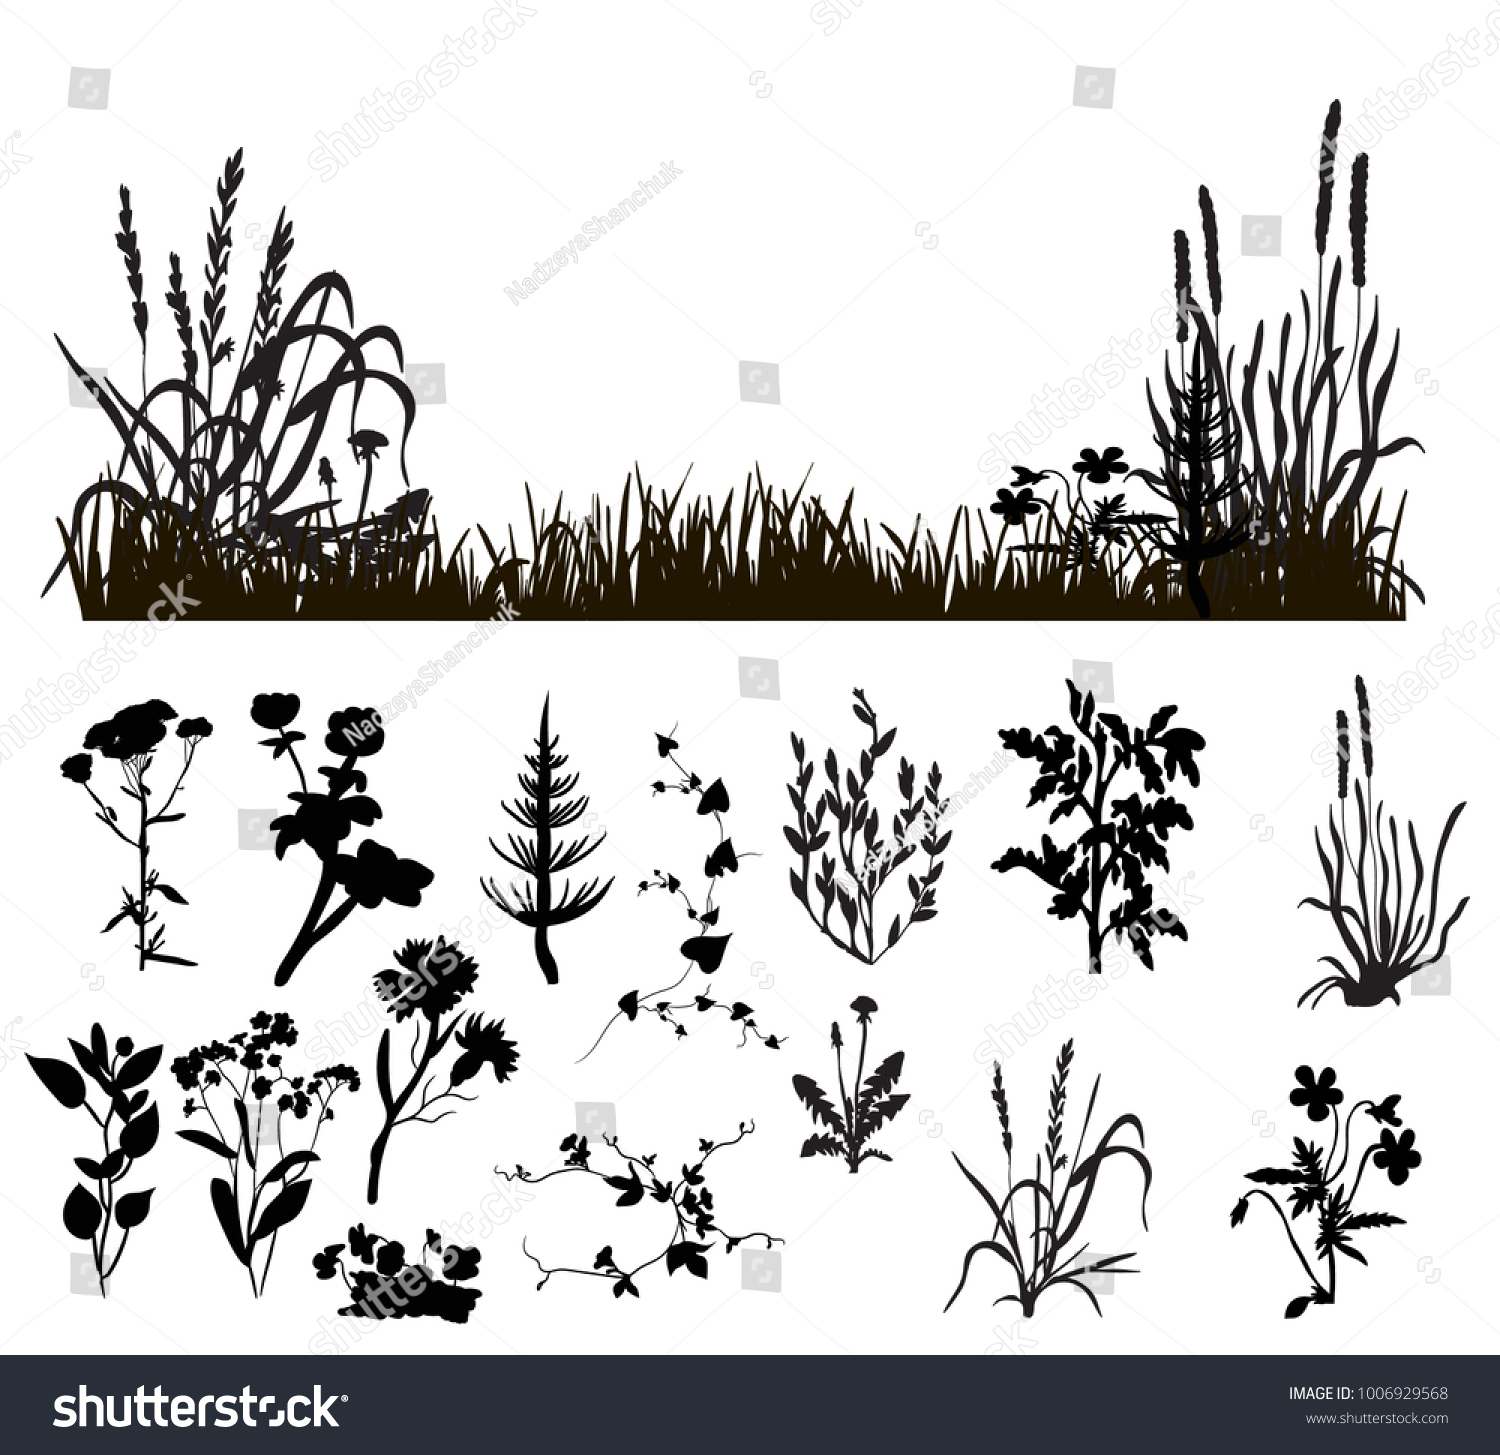 Isolated Silhouette Grass Plants Stock Vector 1006929568 - Shutterstock